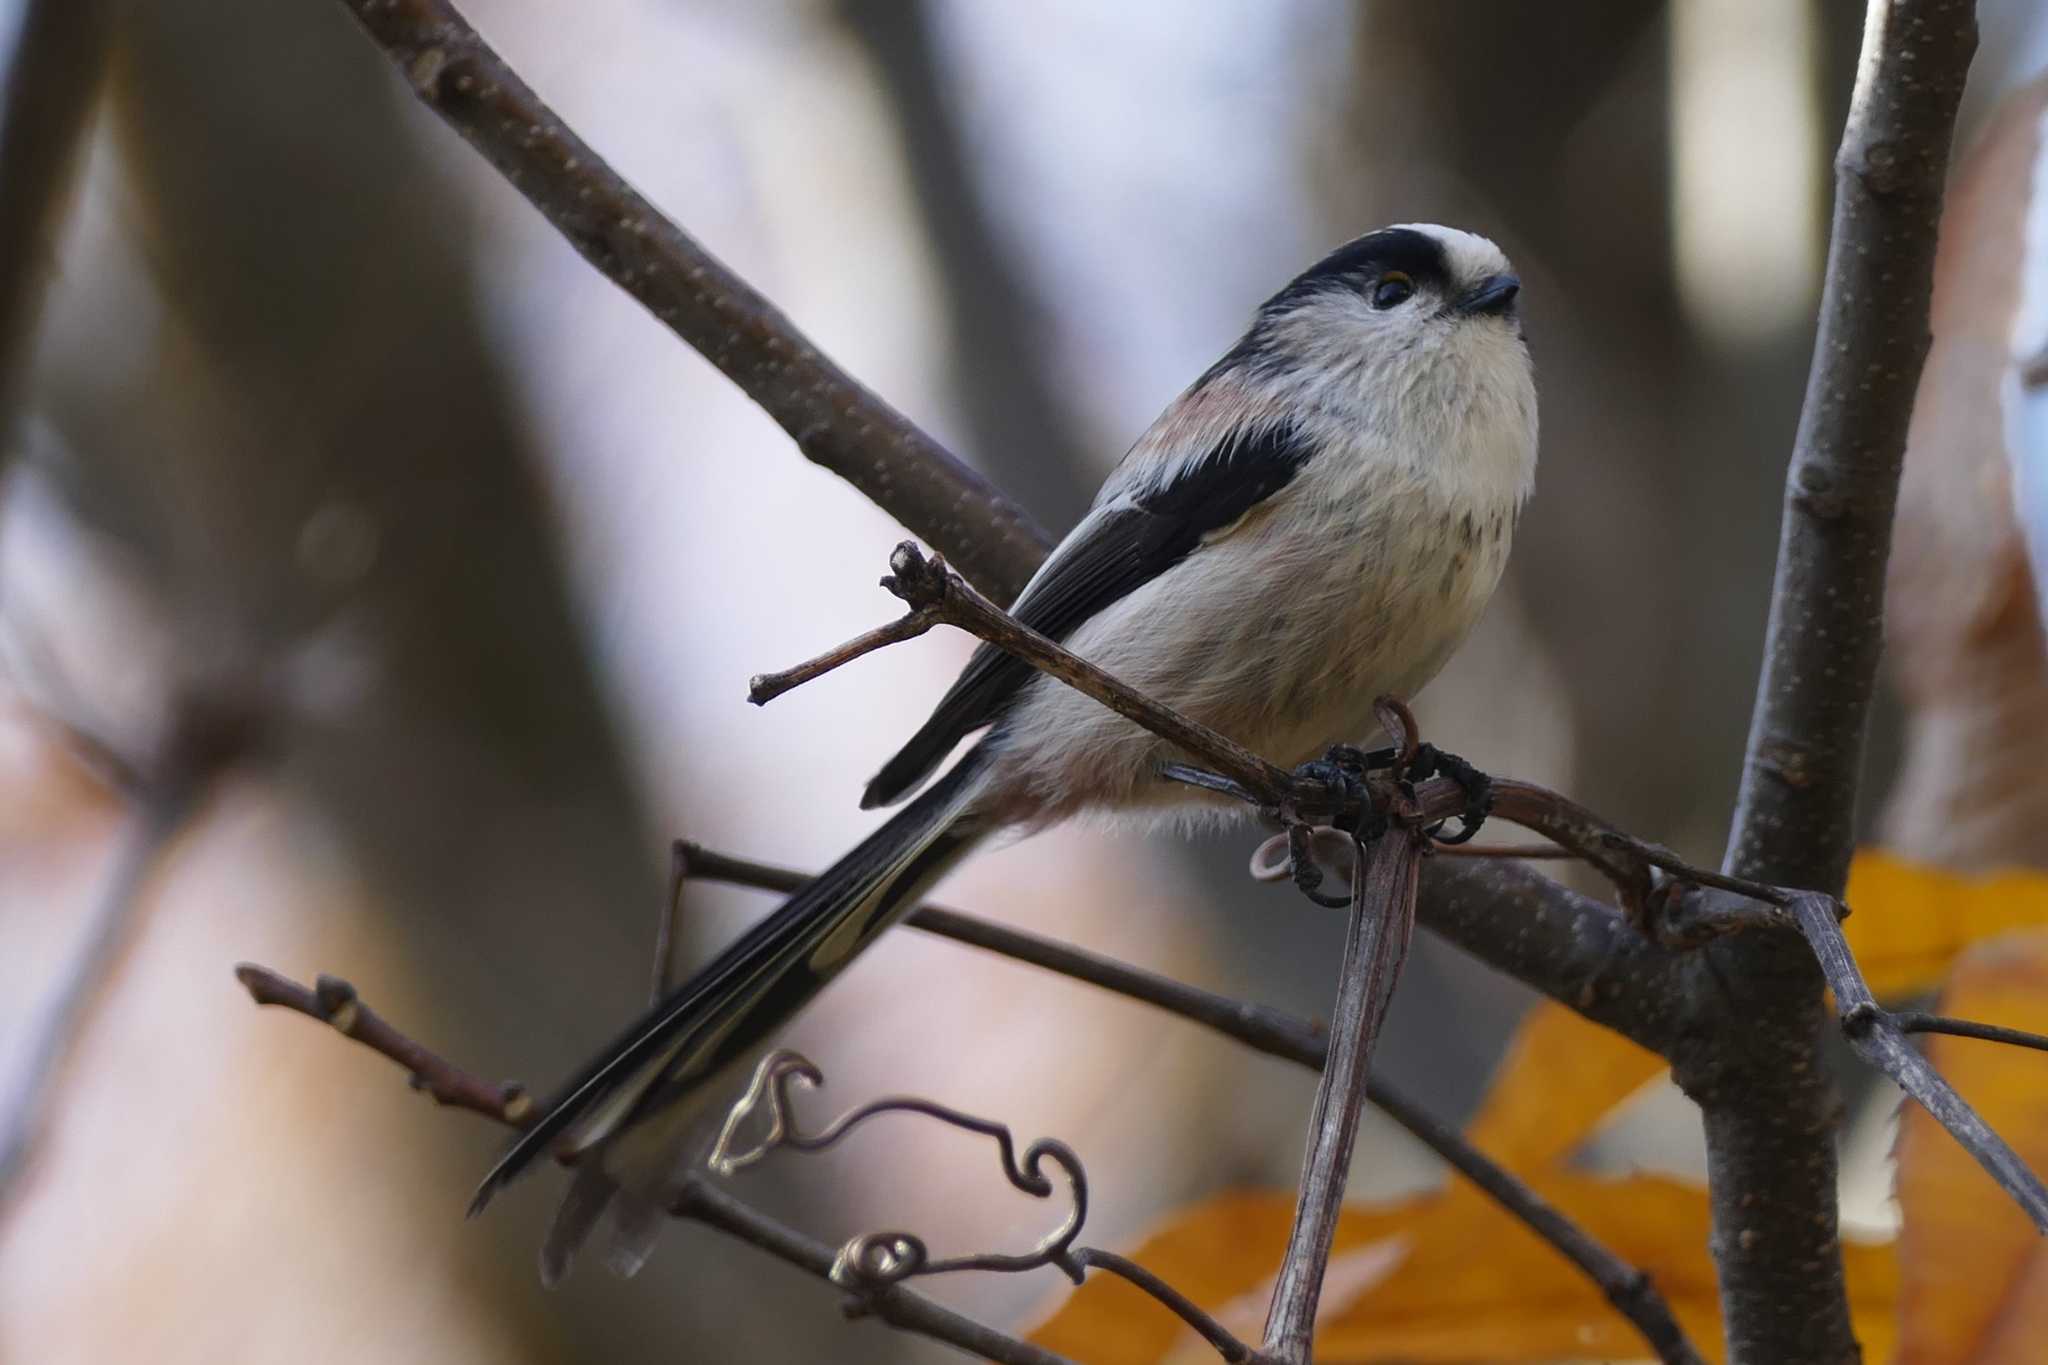 Photo of Long-tailed Tit at 赤羽自然観察公園 by アカウント5509